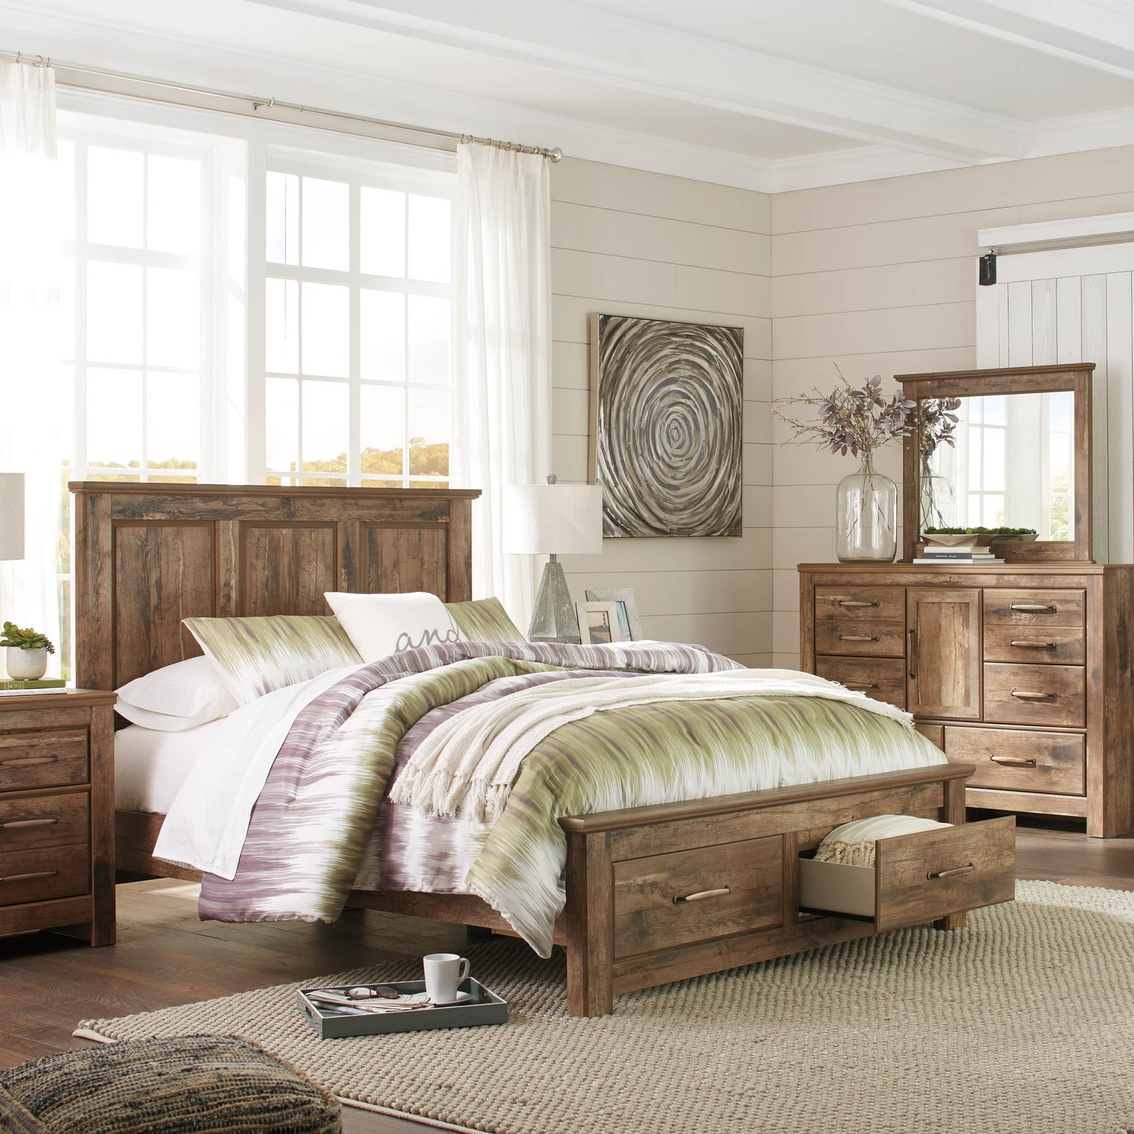 Signature Design by Ashley Blaneville Storage Bed - Image 4 of 4